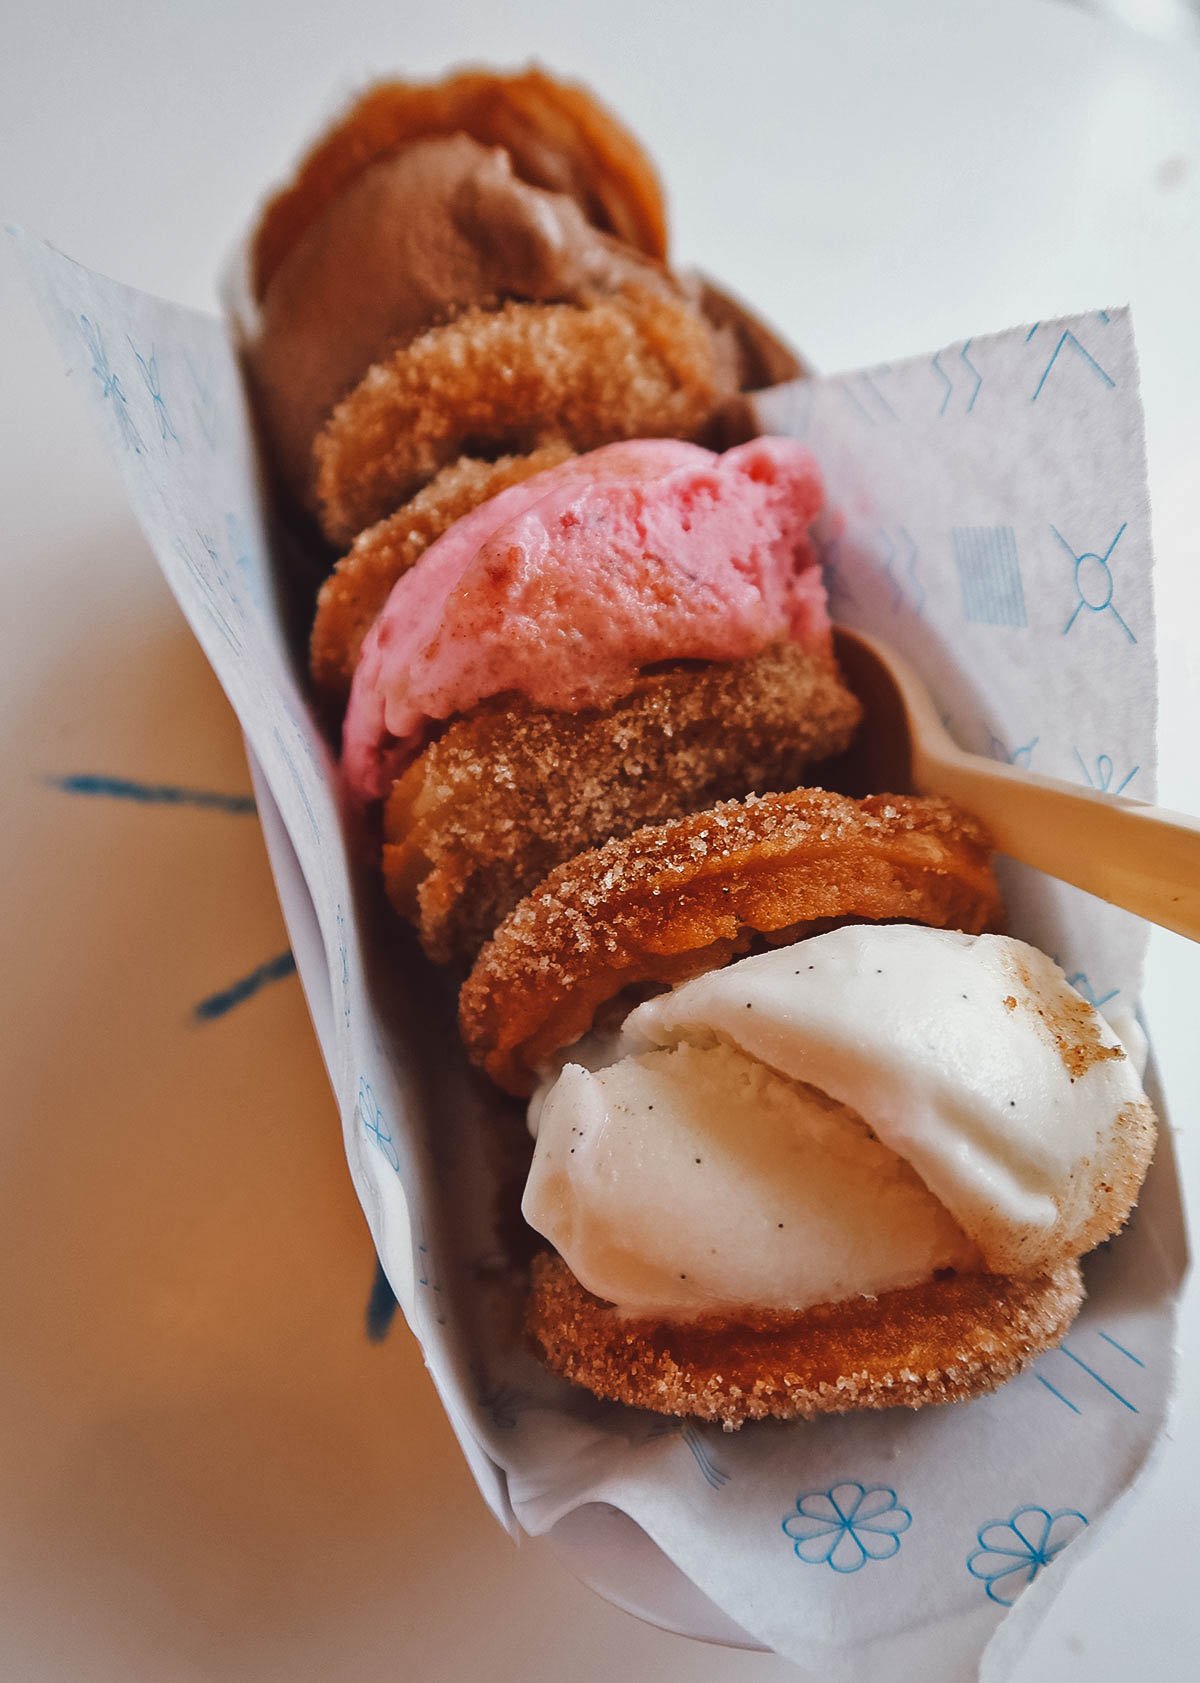 Churro ice cream sandwiches from a pastry shop in Mexico City